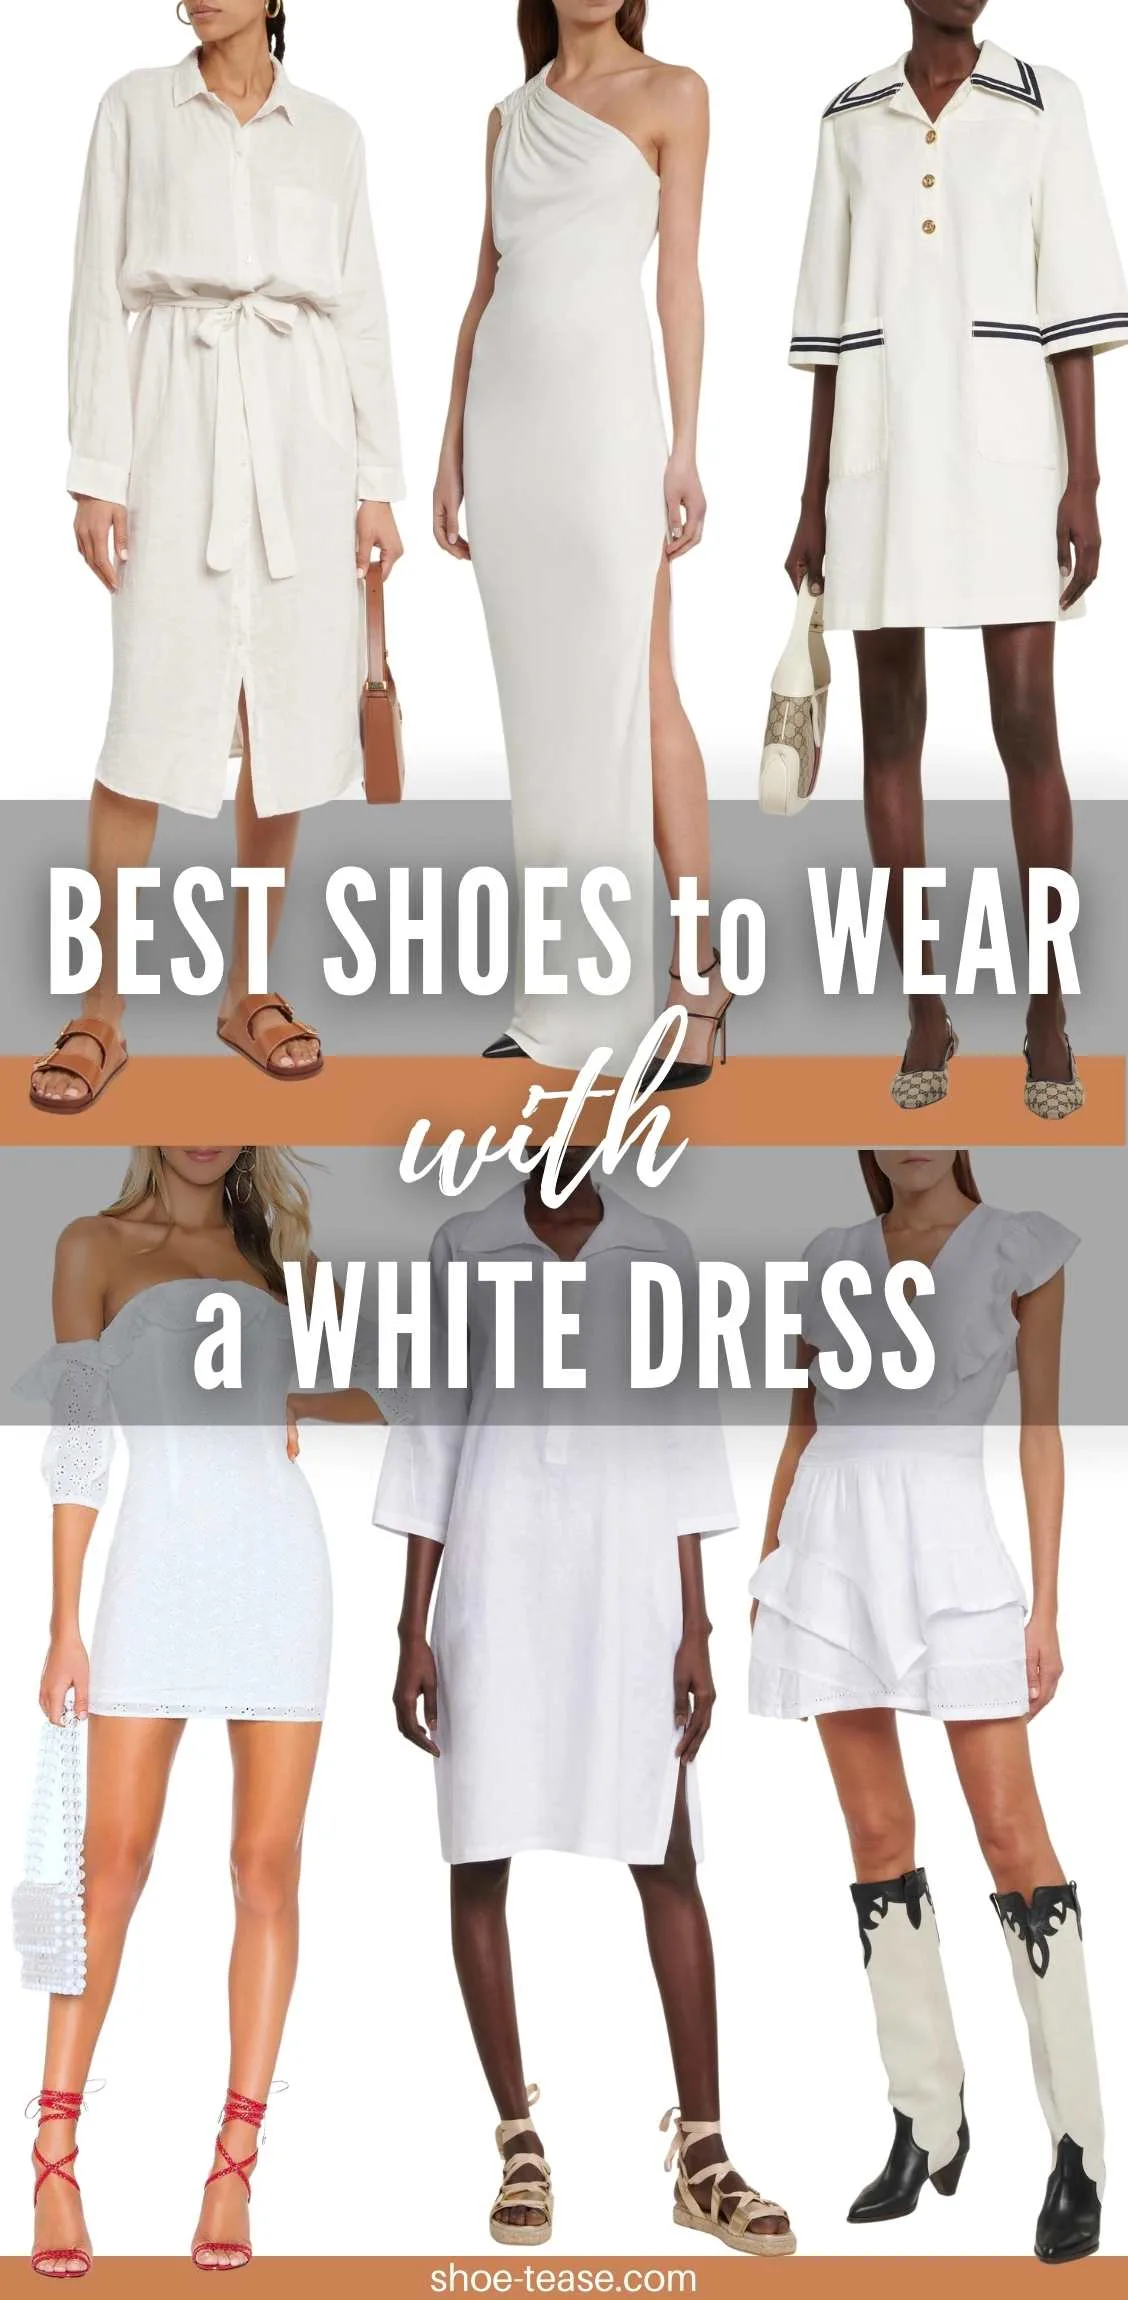 What Color Shoes Go With A White Dress?